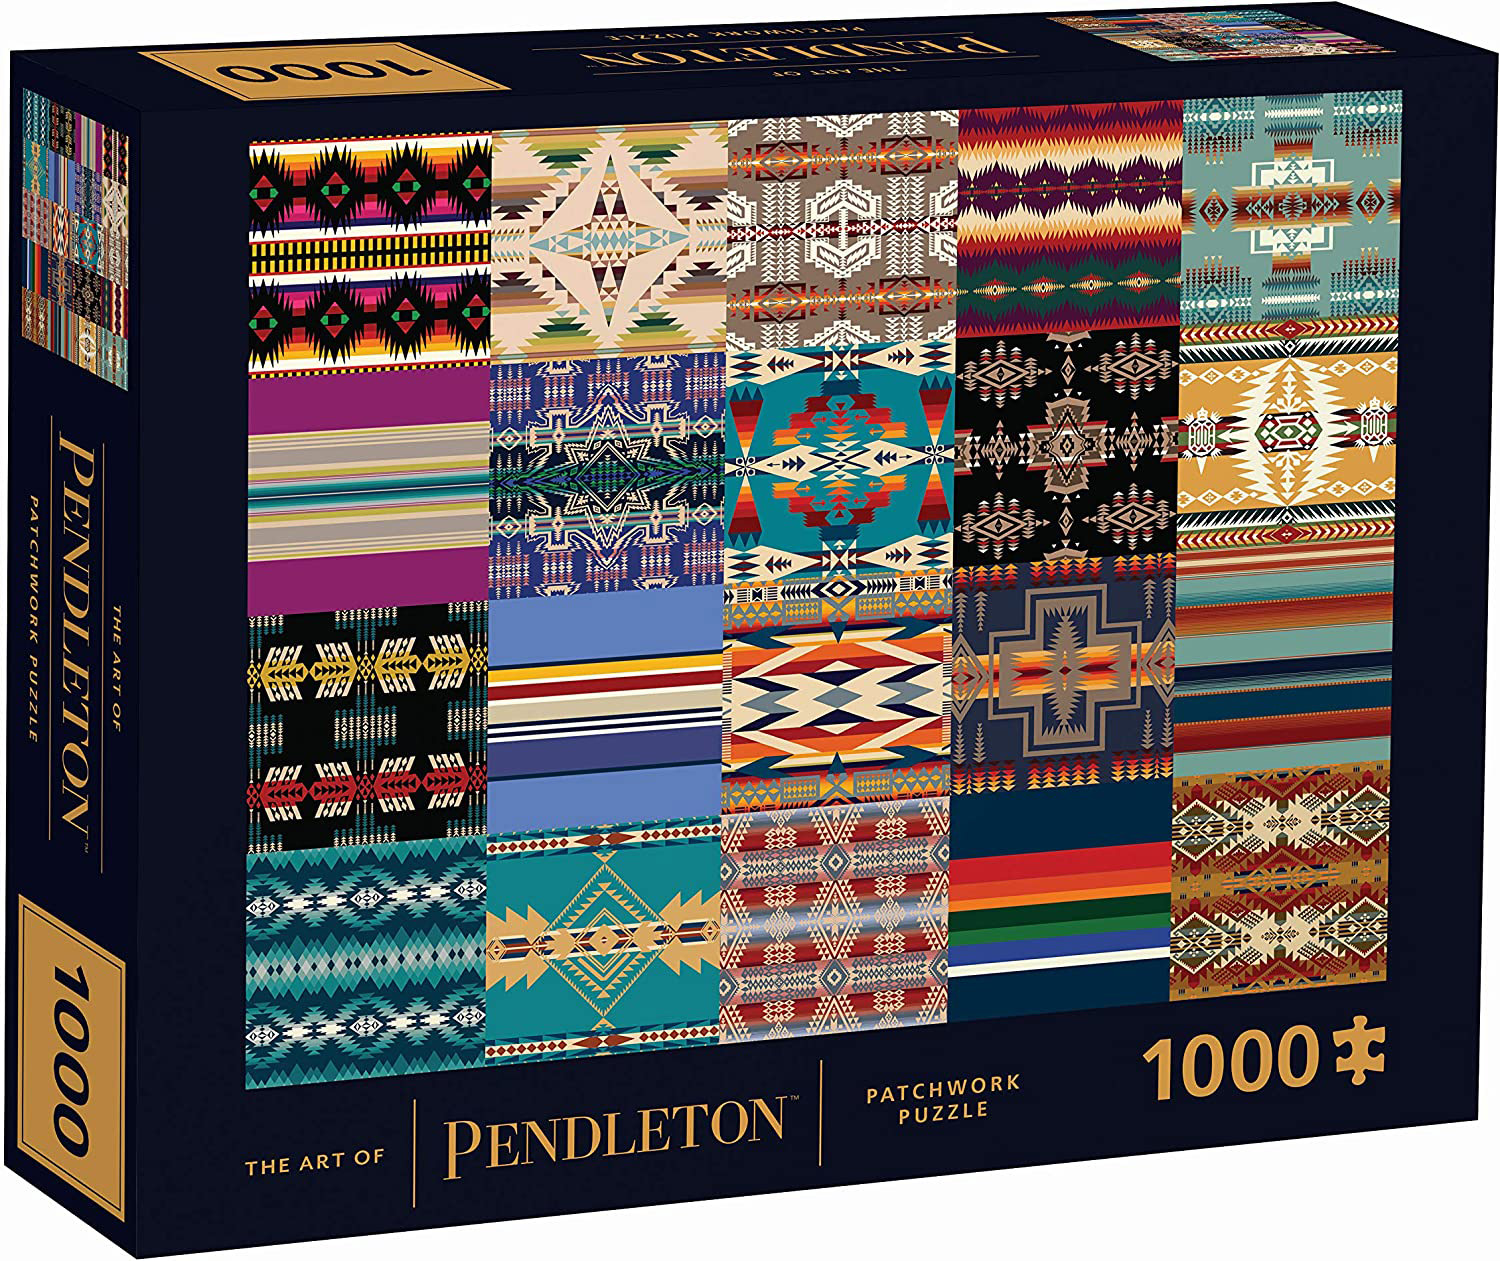 The Art of Pendleton Patchwork Collage Jigsaw Puzzle